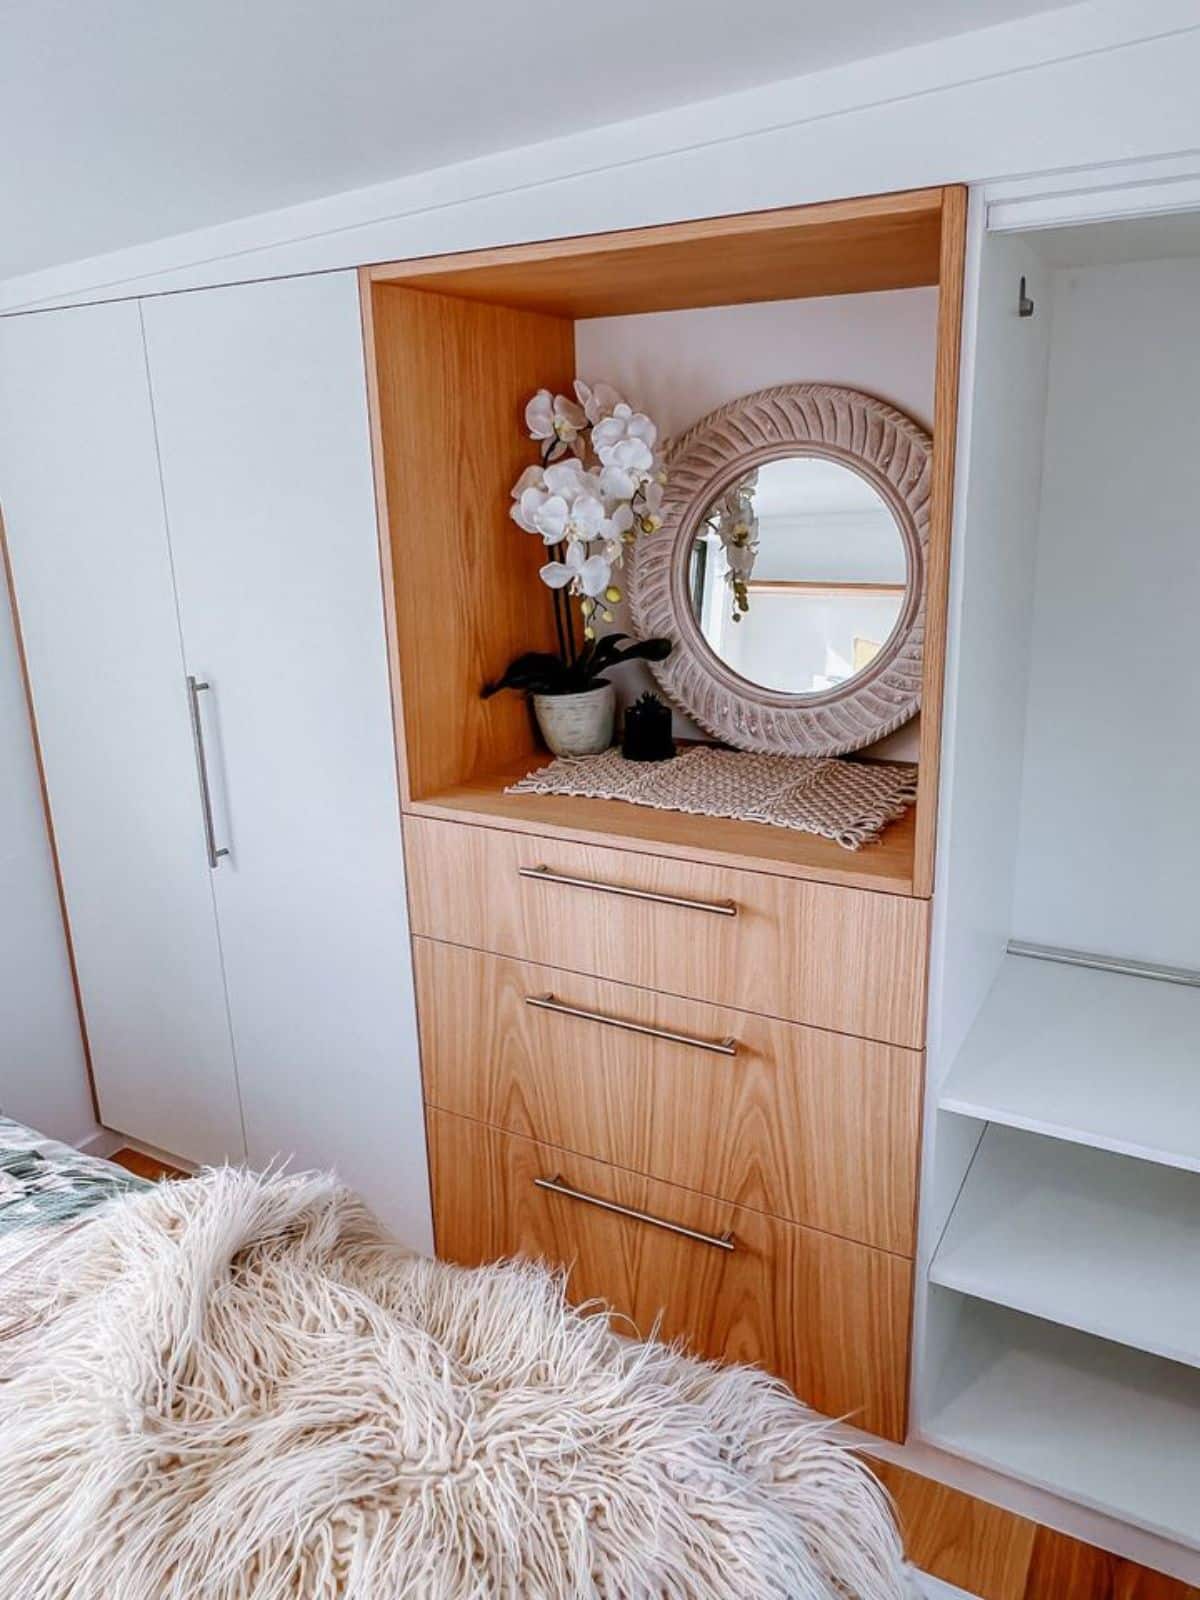 storage cabinets in bedroom of 2 bedroom tiny house